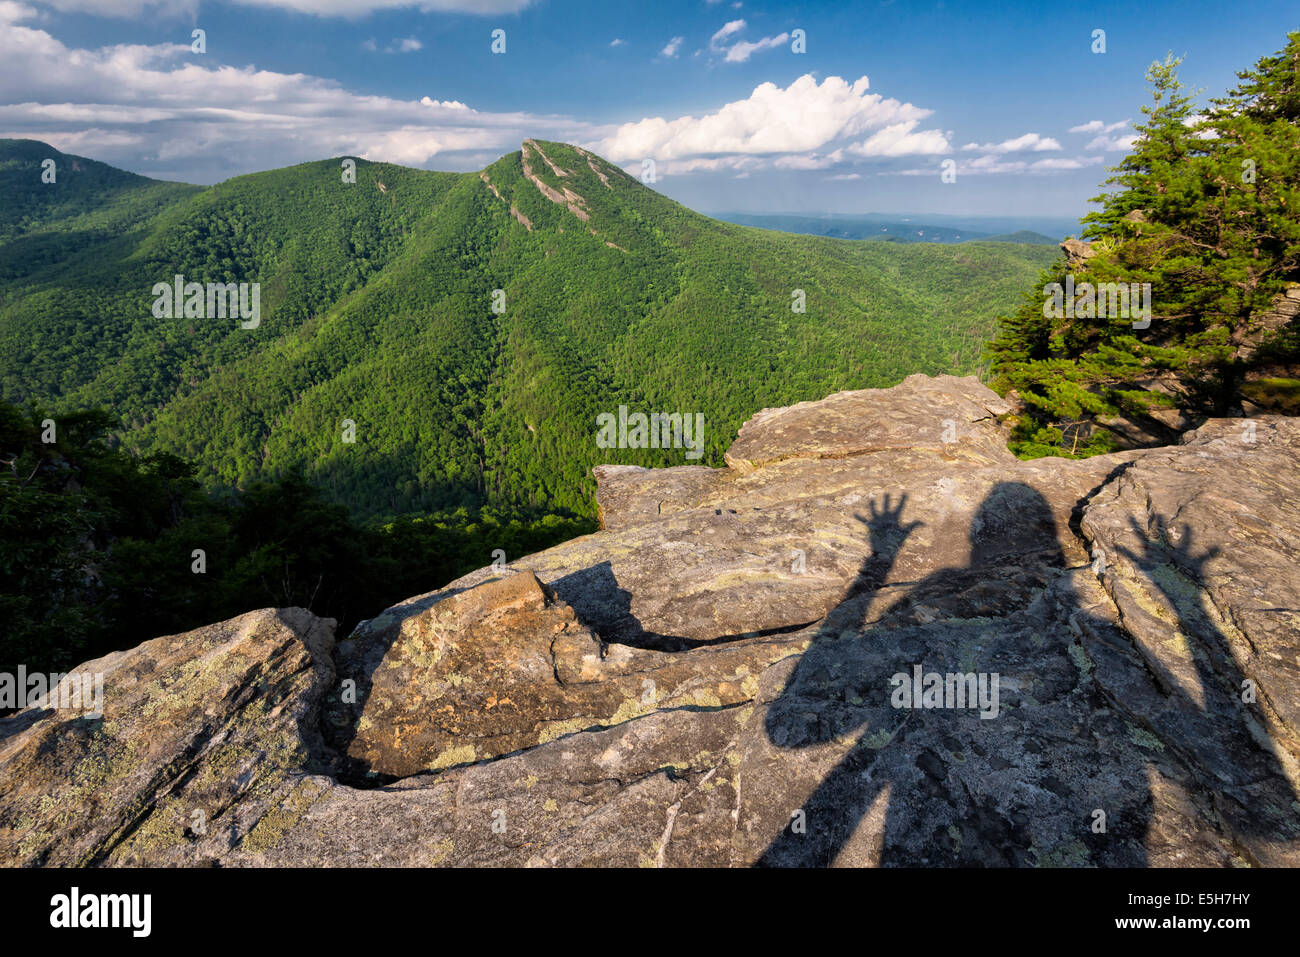 Shadow of a photographer overlooking the Linville Gorge from Wisemans View Overlook near the Blue Ridge Parkway, NC. Stock Photo